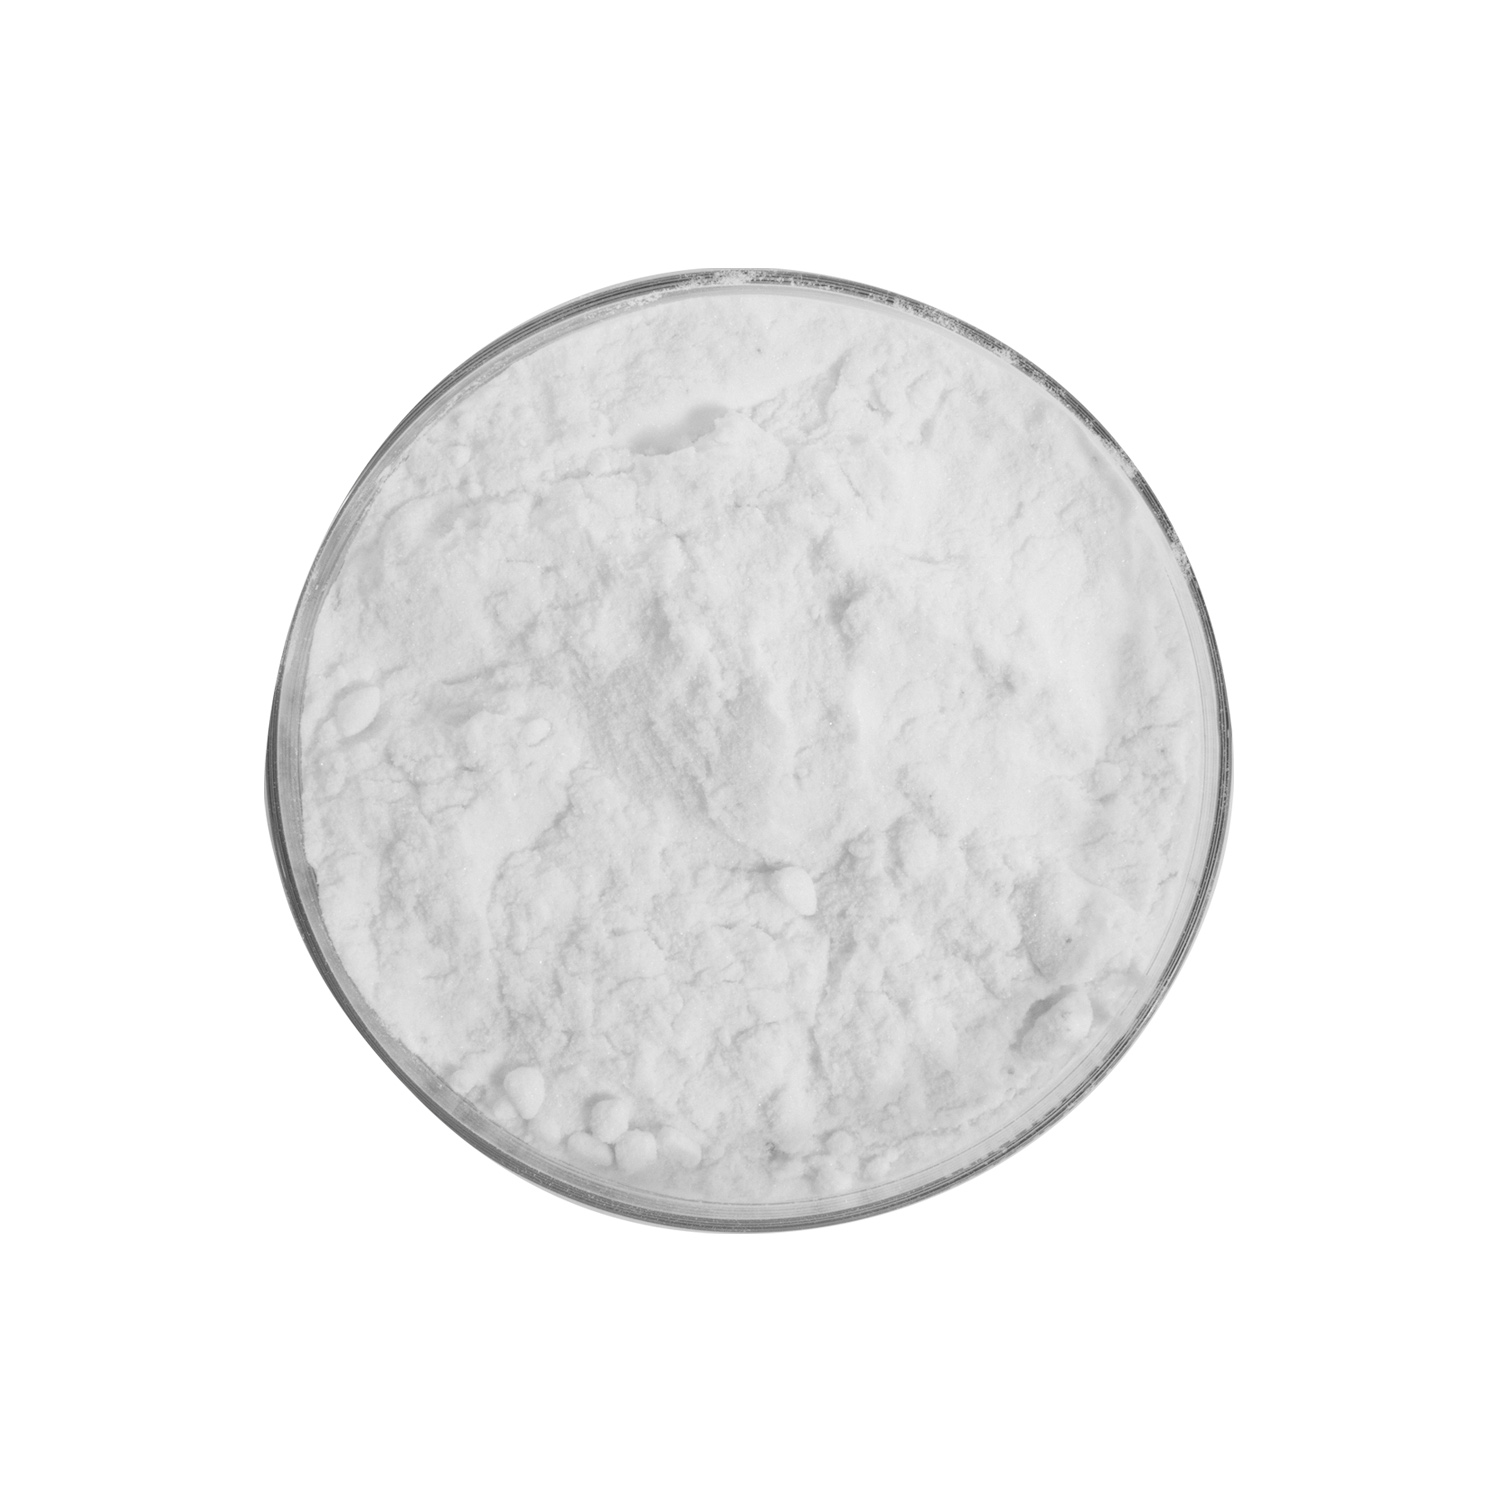 RC Supply Chemical Intermediate Raw Material Tetramisole Hydrochloride CAS 5086-74-8 with Best Price